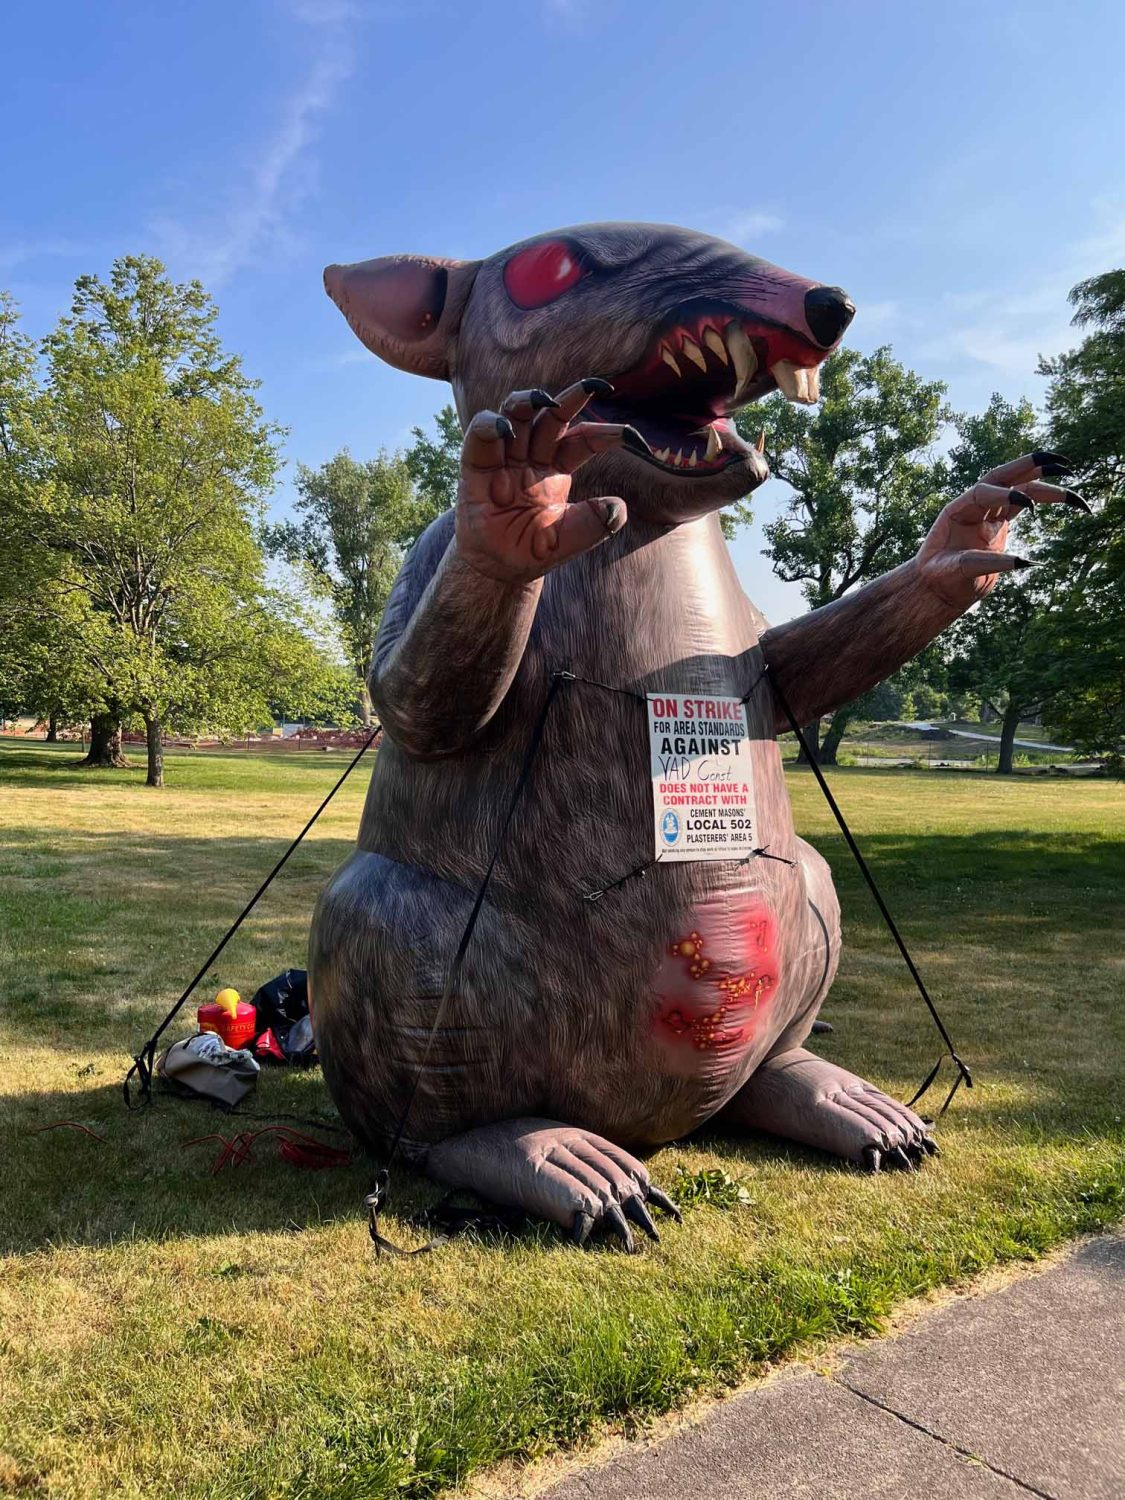 inflatable rat sitting on grass tied down by ropes